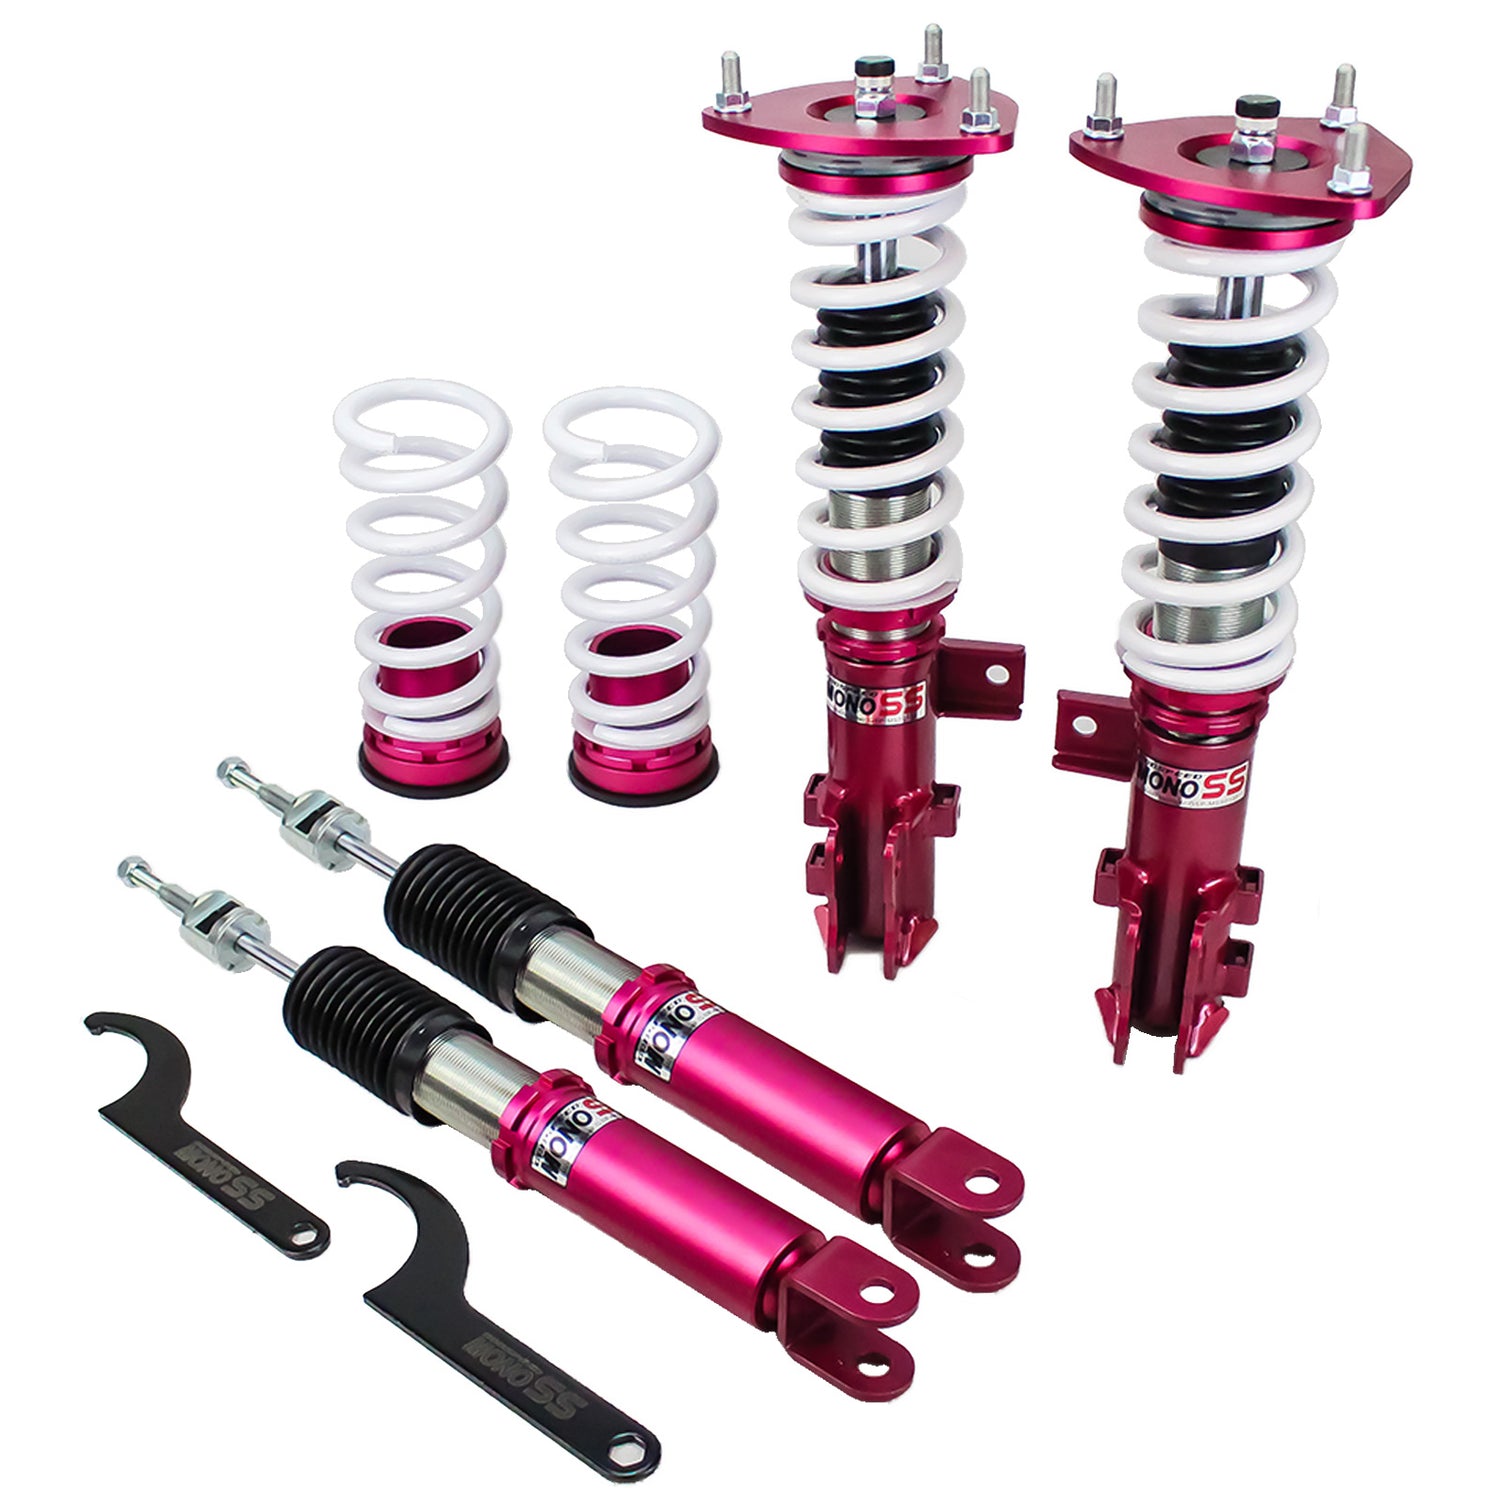 Godspeed MSS0107 MonoSS Coilover Lowering Kit, Fully Adjustable, Ride Height, Spring Tension And 16 Click Damping, Hyundai Tucson 2009-15